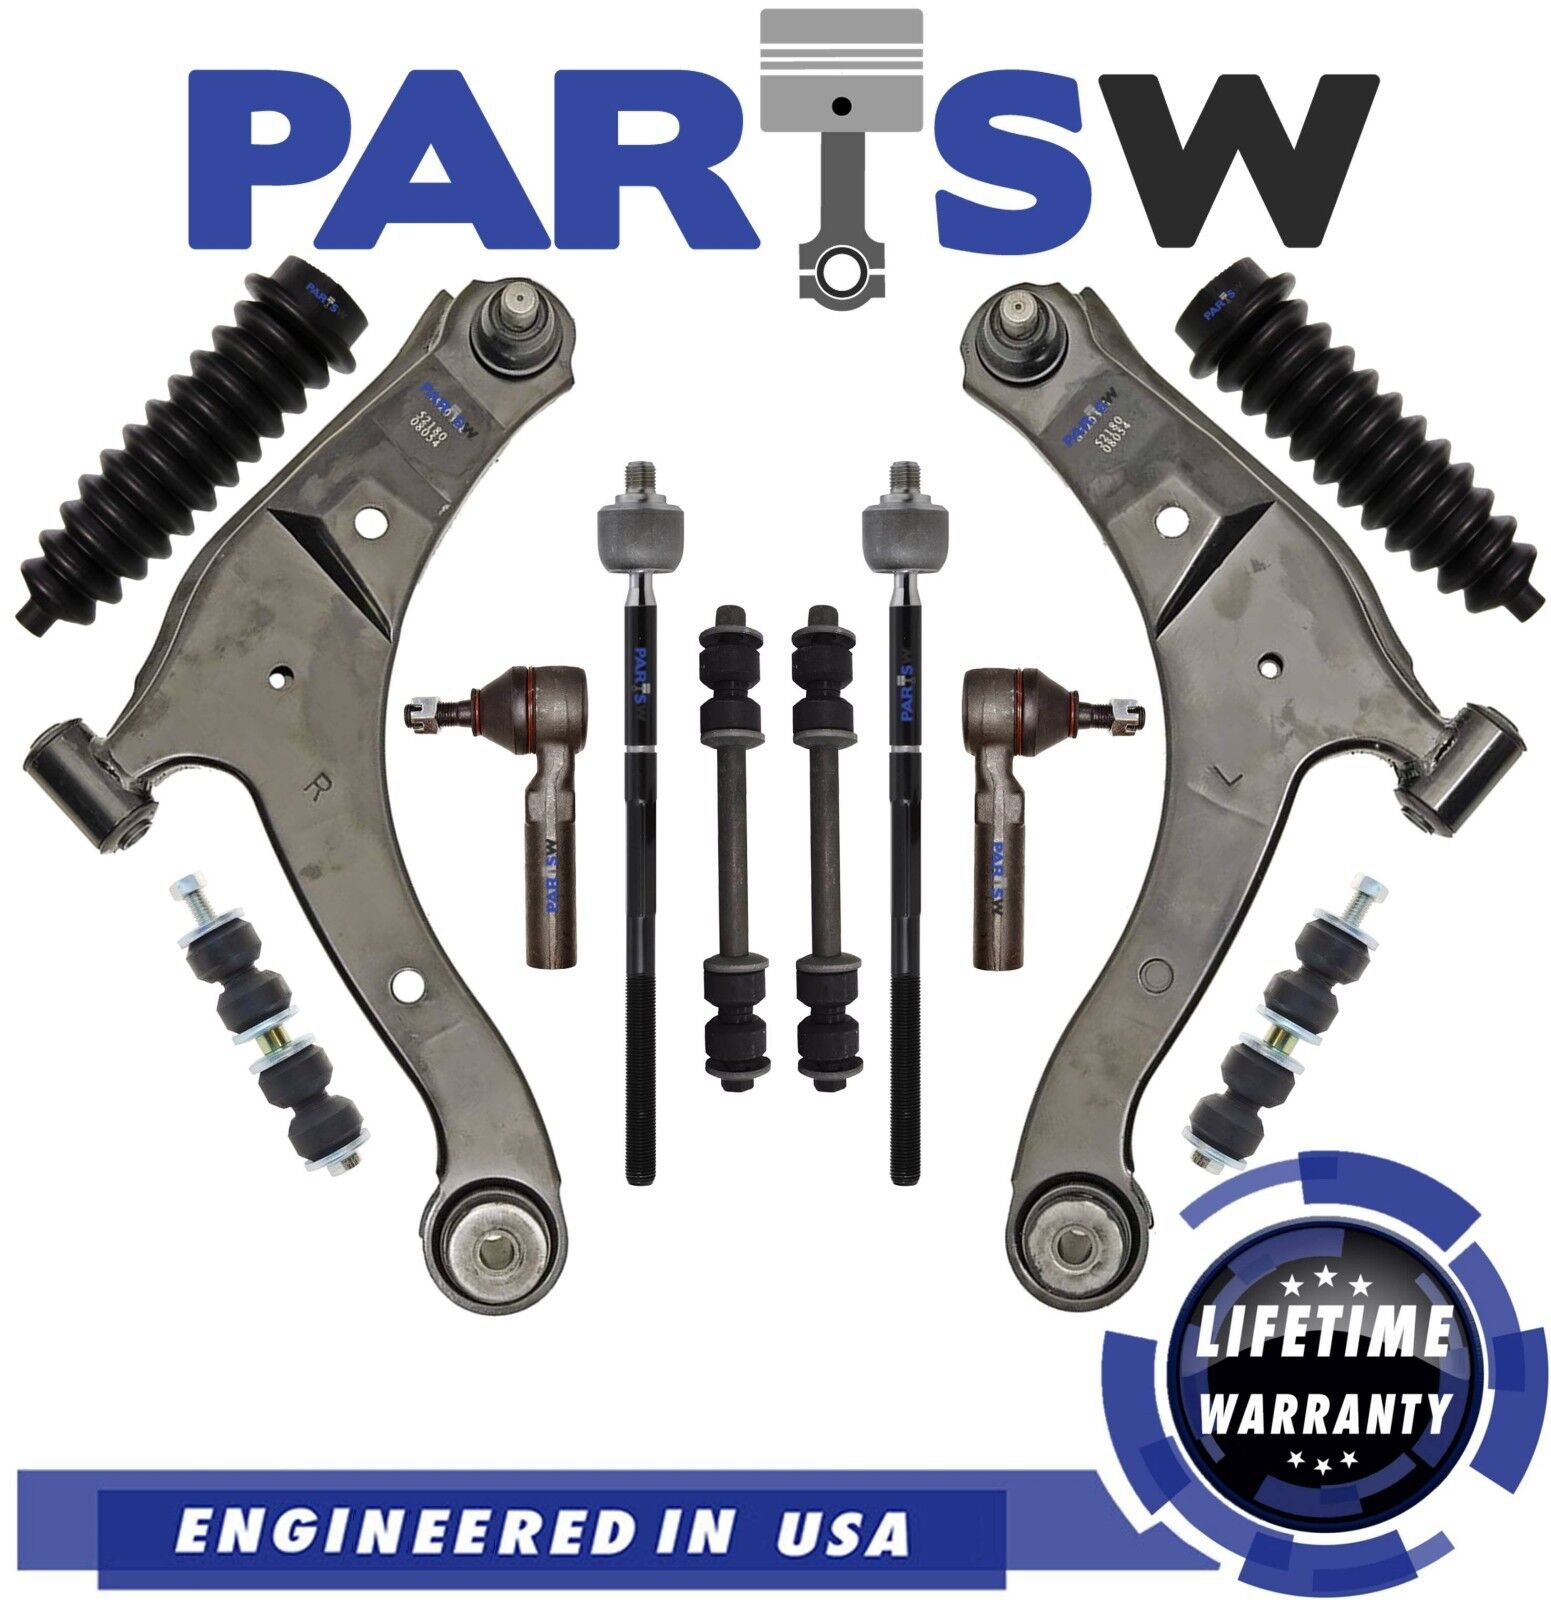 12 Pc Suspension Kit for Dodge Neon, Control Arms, Rear & Front Sway Bar Link